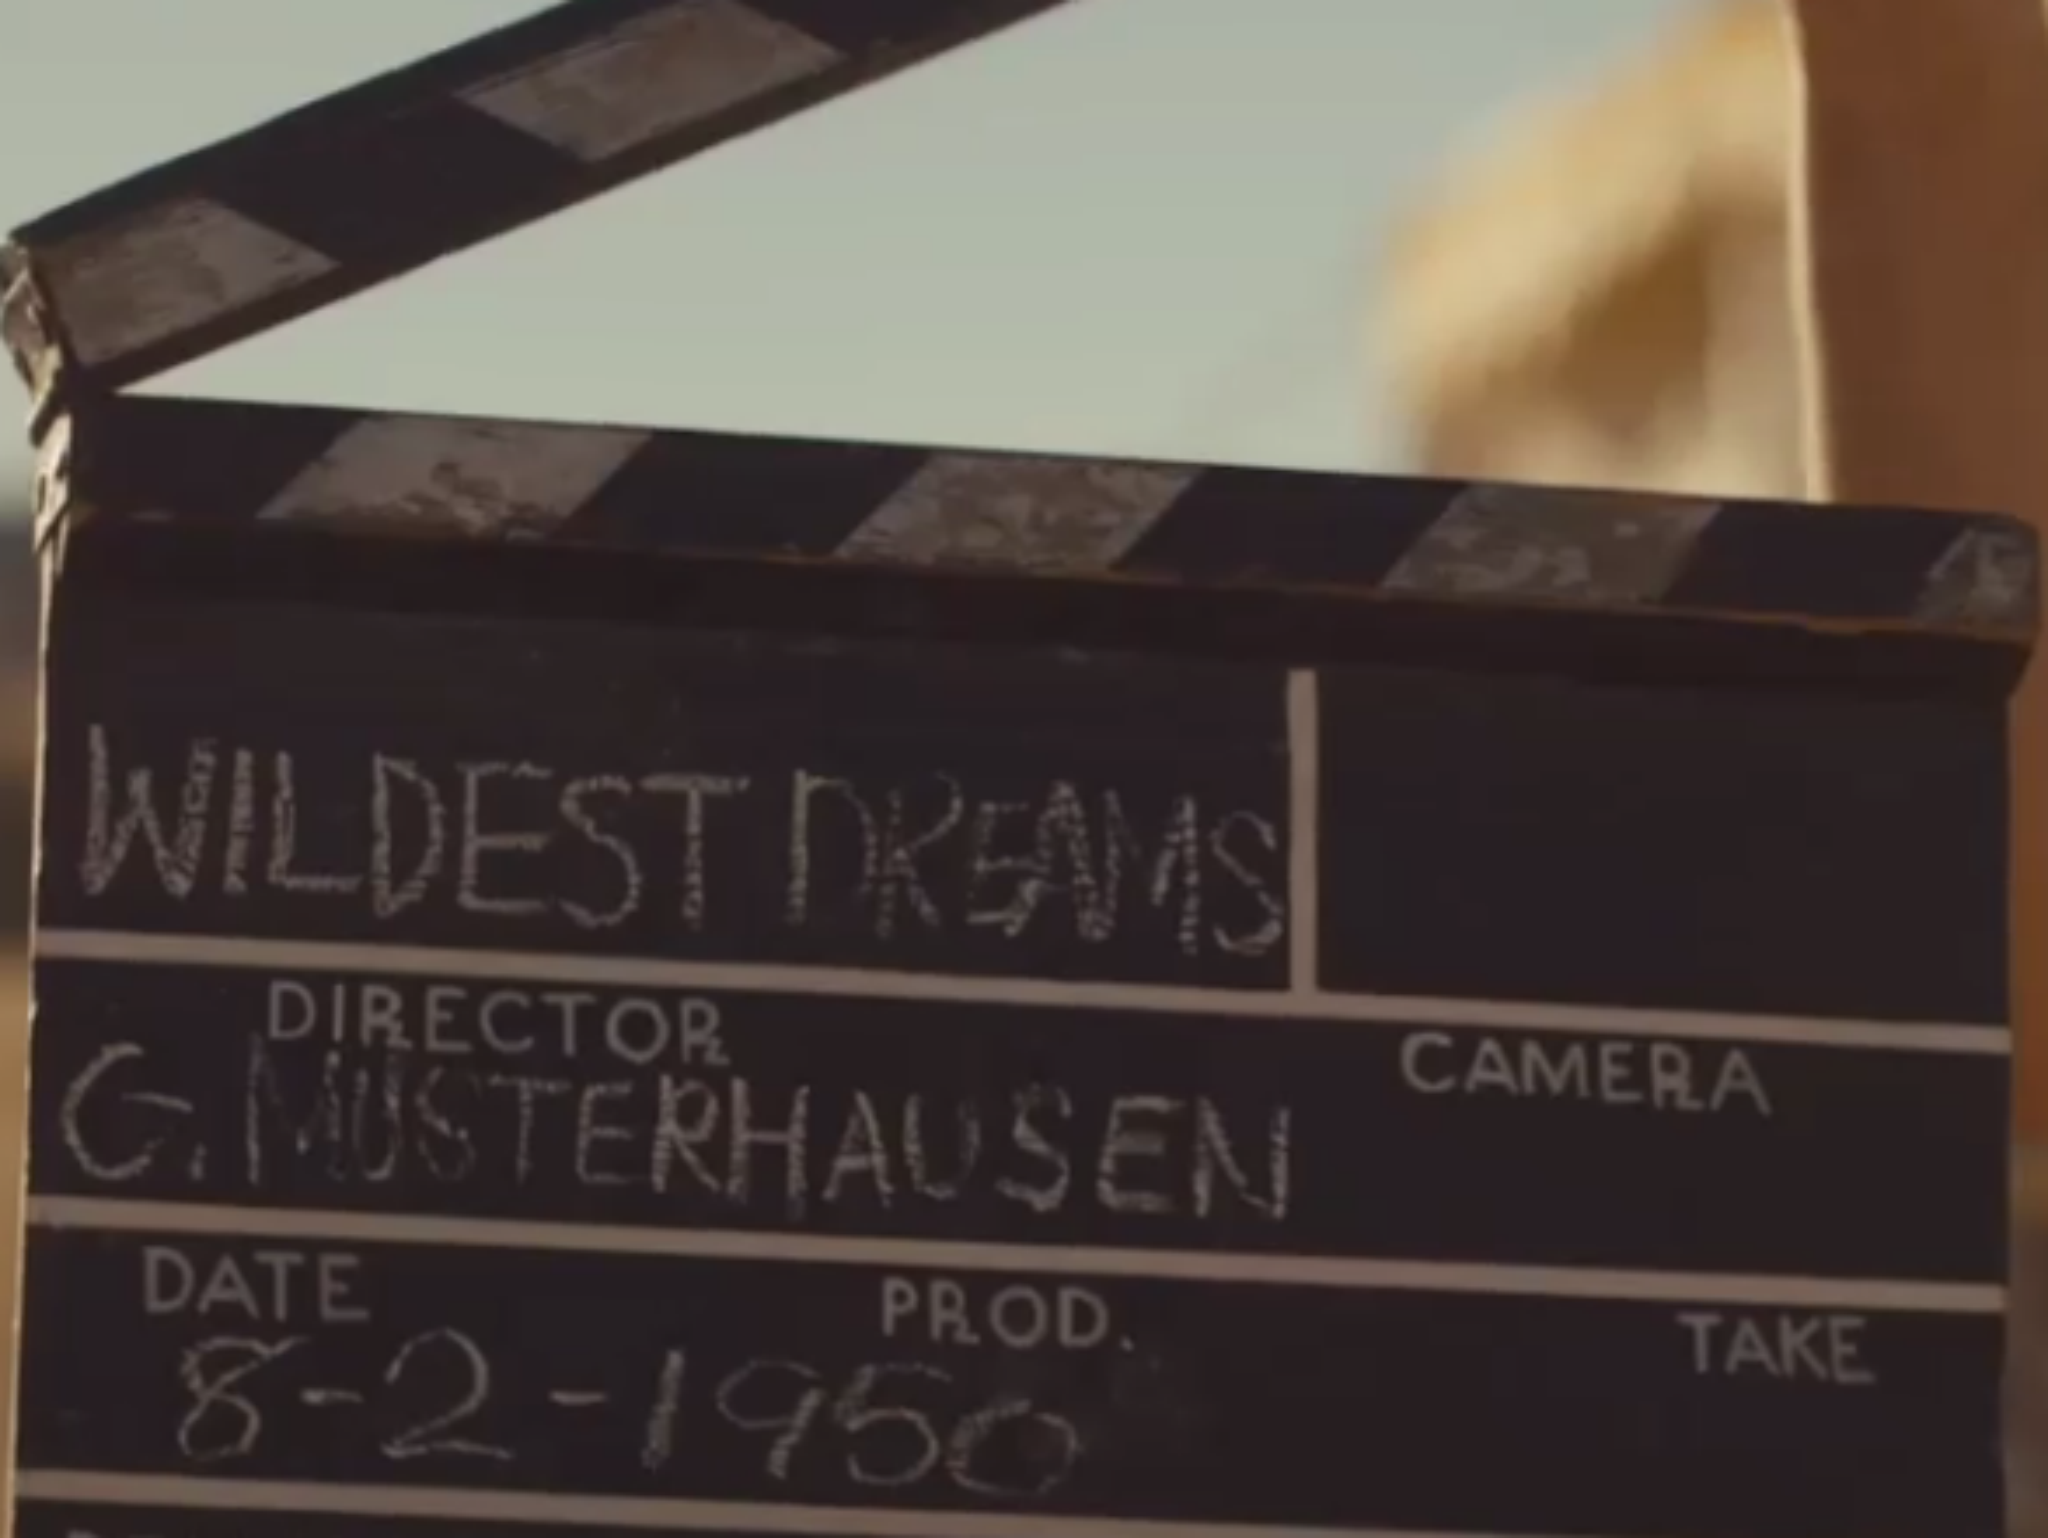 Taylor Swifts new video for 'Wildest Dream' will debut at the VMAs